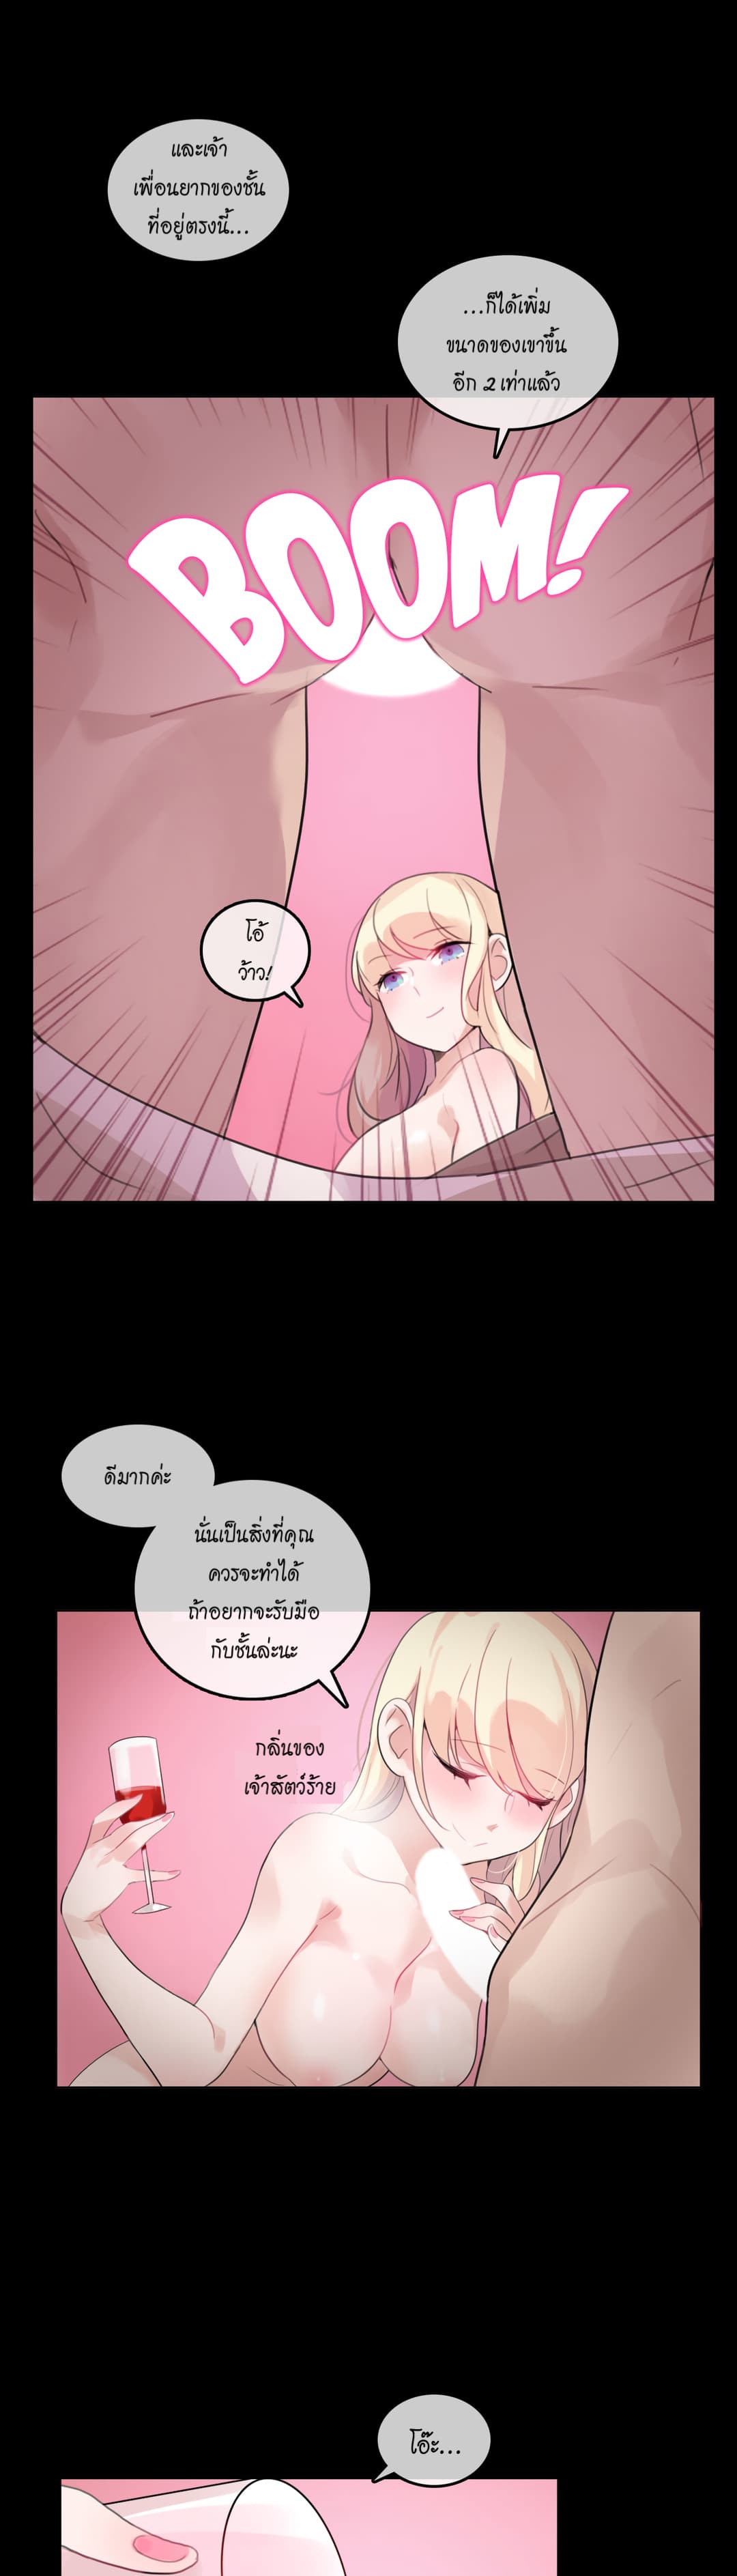 A Pervert’s Daily Life 18 (19)